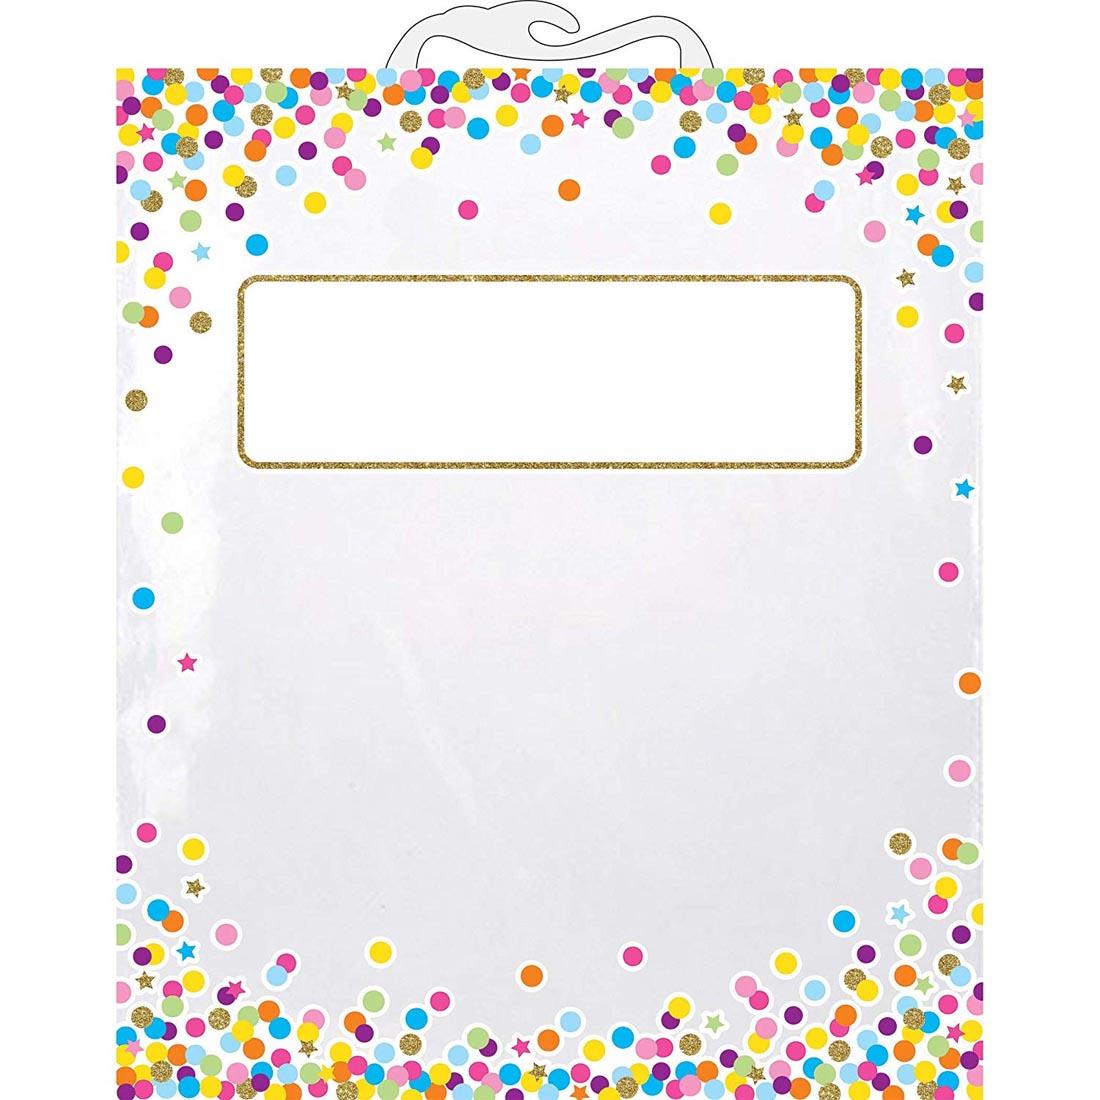 Clear plastic poly bag with plastic handle, decorated with dots and stars